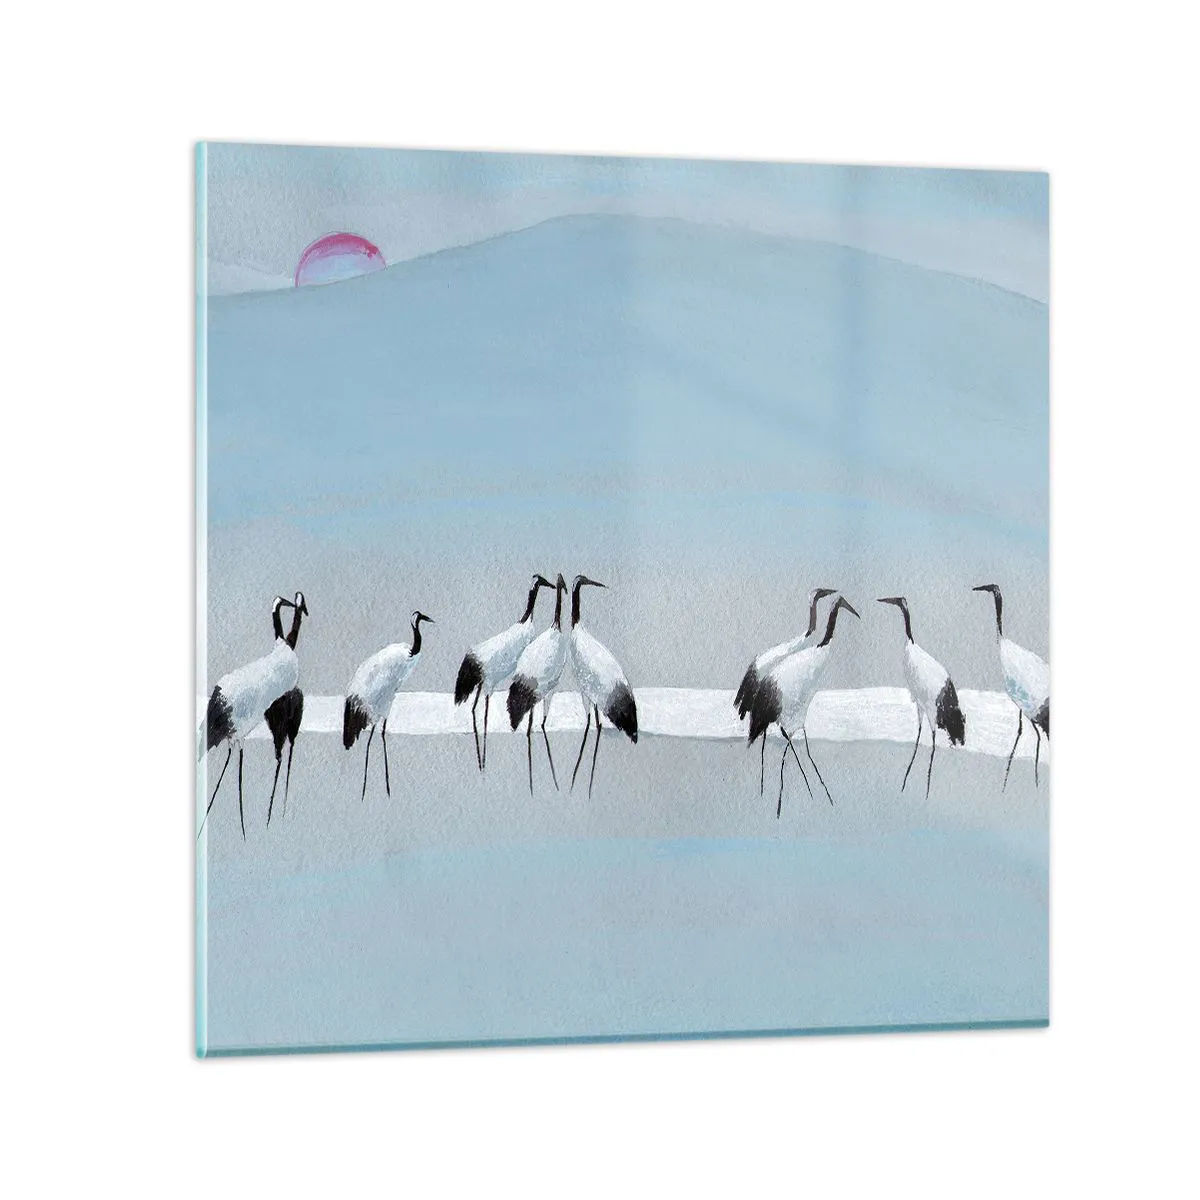 Glass picture  Arttor 40x40 cm - After a Hot Day - The Birds, Cranes, Nature, Japan, Culture, For living-room, For bedroom, White, Black, Horizontal, Glass, GAC40x40-4921